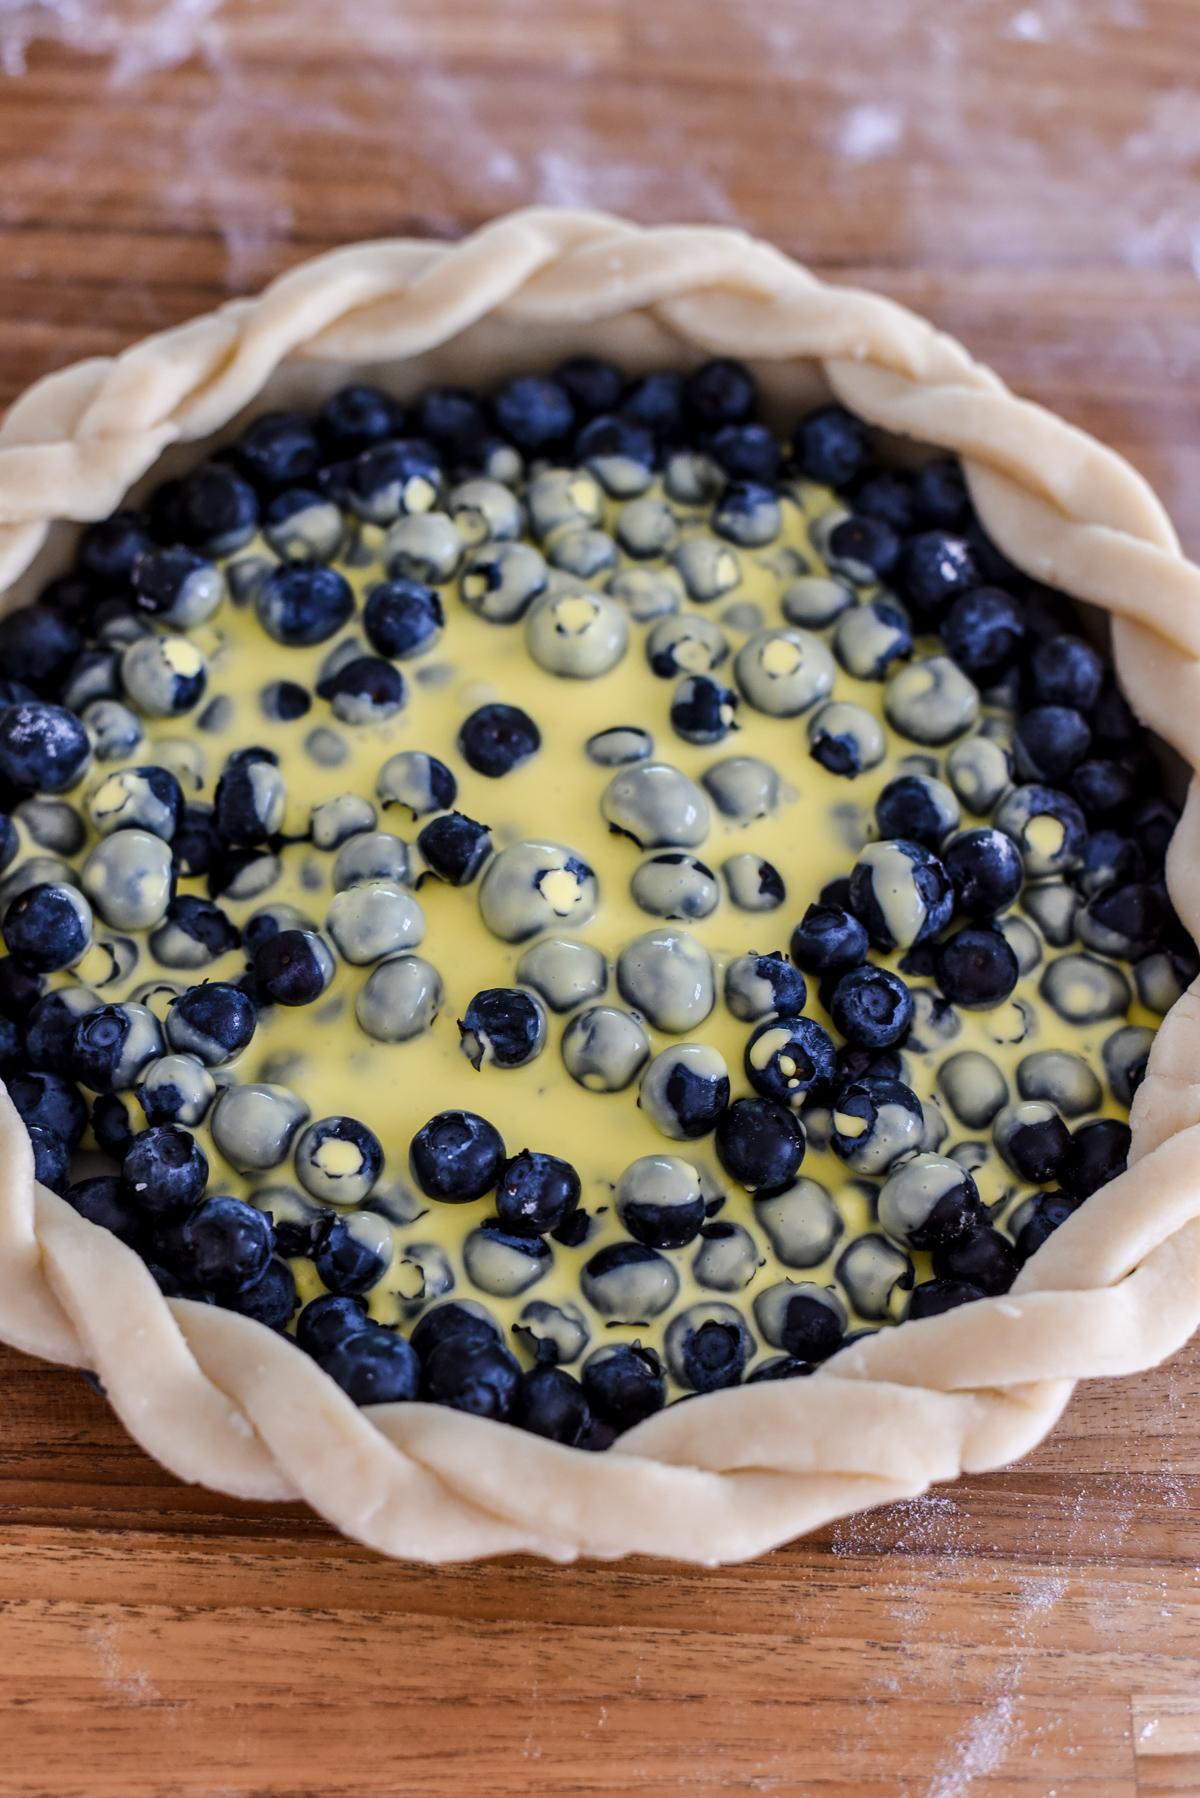 Pour the migaine over the blueberries and toss to evenly coat. (Audrey Le Goff)